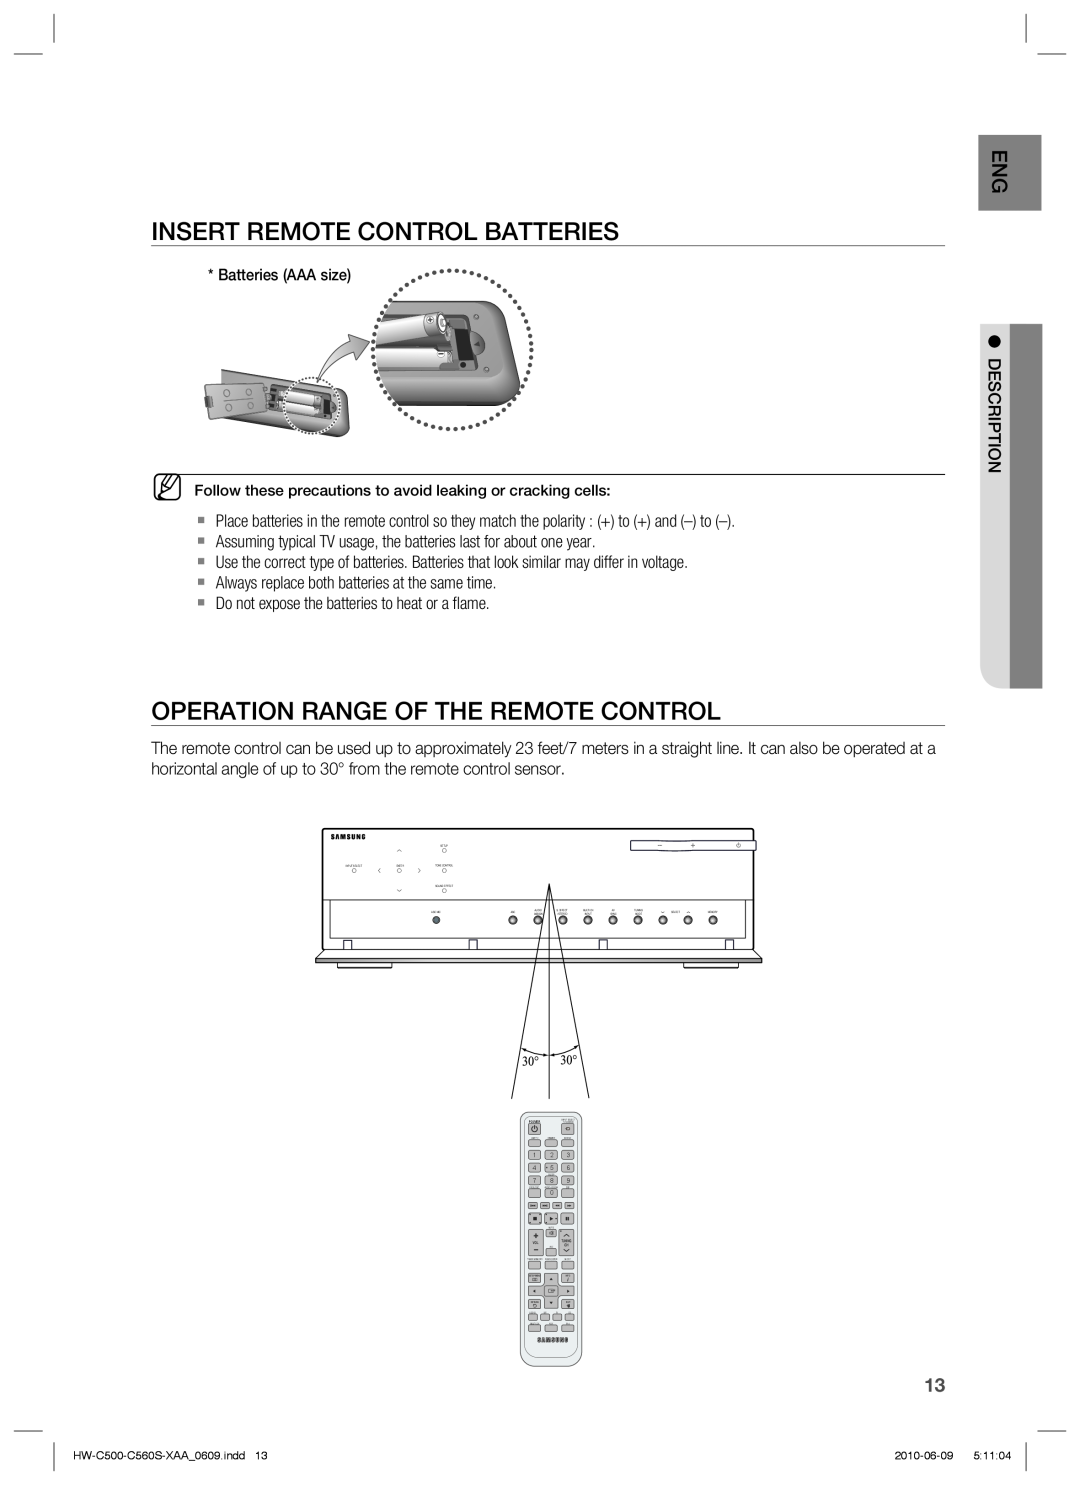 Samsung HW-C560S, HW-C500 user manual Insert Remote Control Batteries, Operation Range Of The Remote Control 